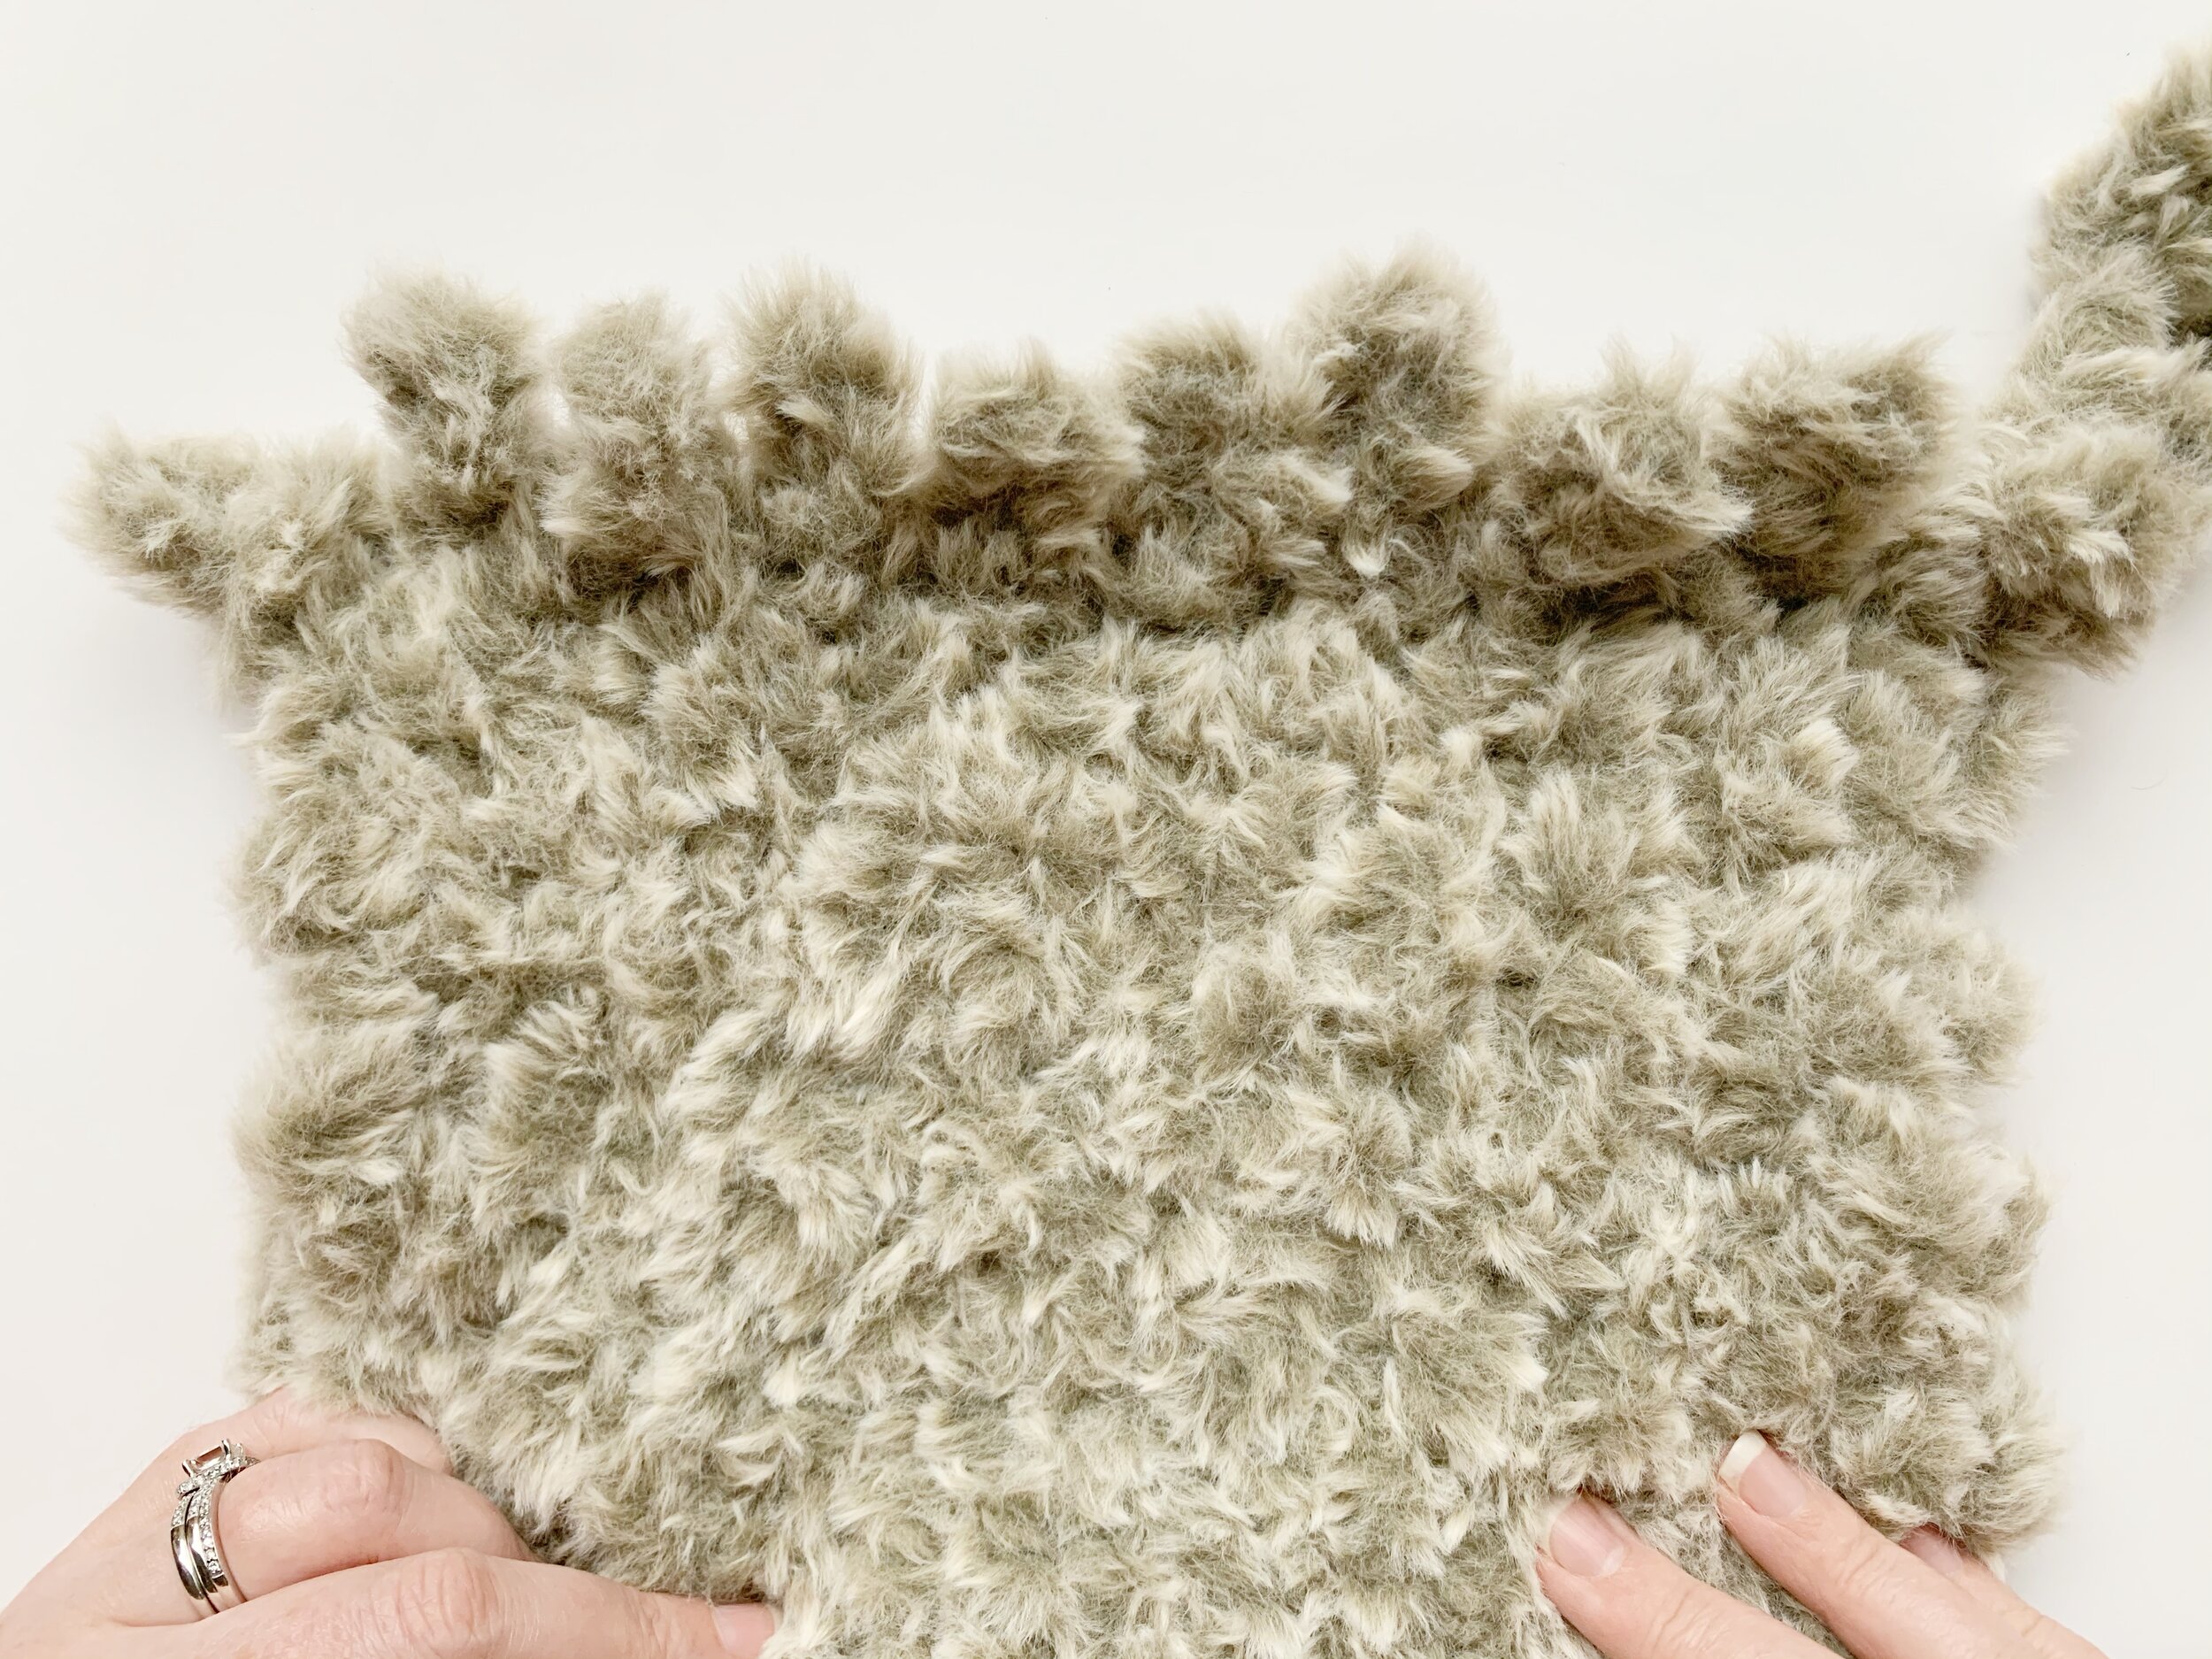 Crochet with Faux Fur Yarn using these Free Crochet Patterns - Left in Knots